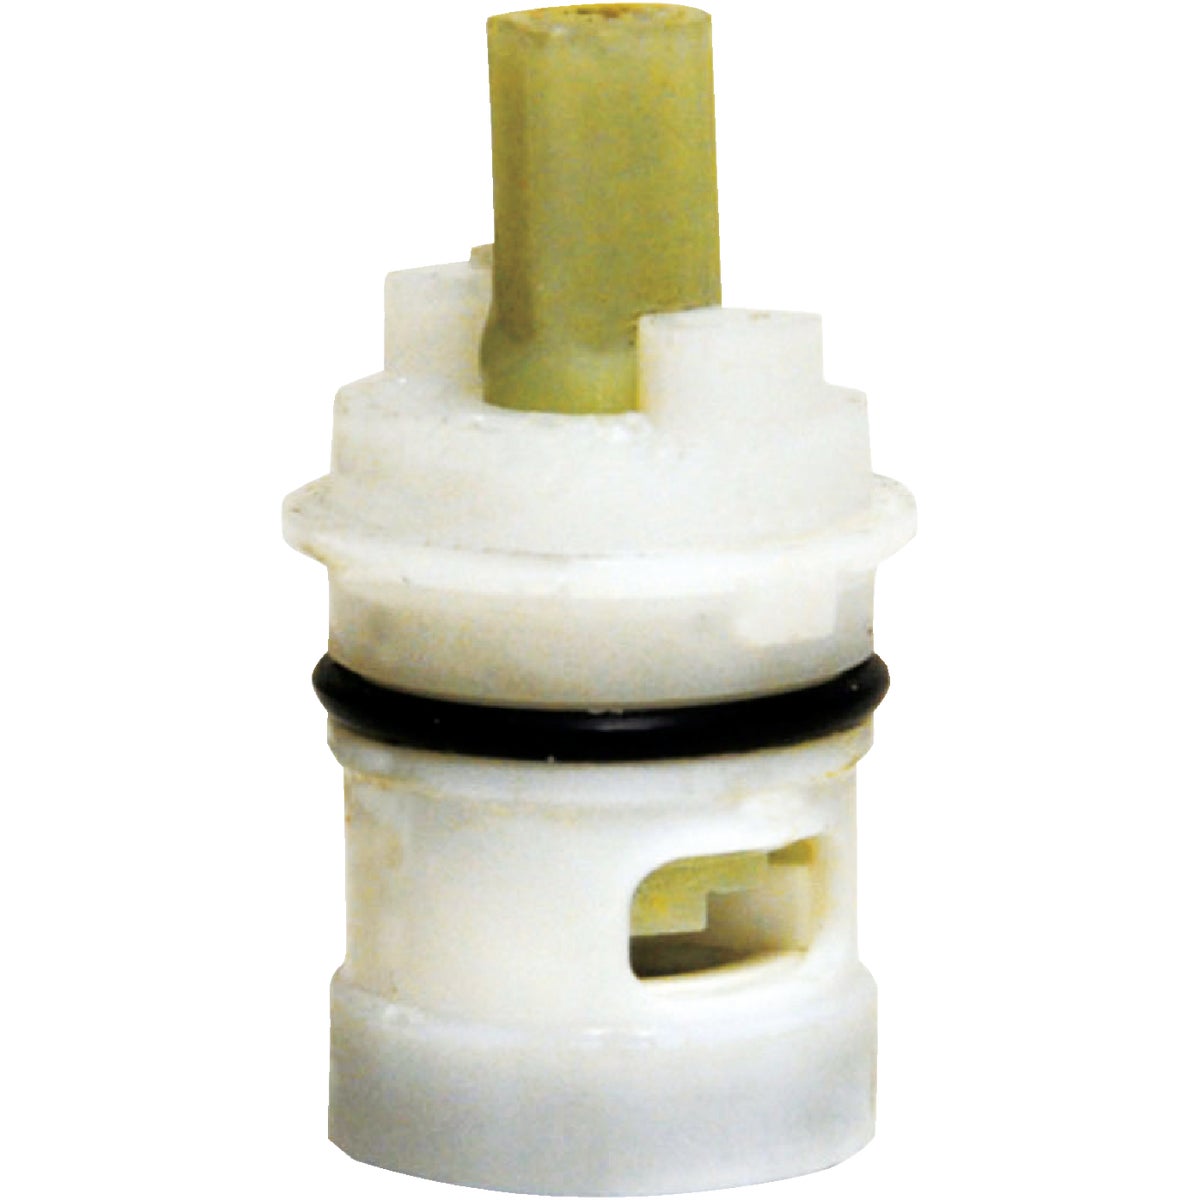 Item 400245, 3S-17H/C hot and cold faucet stem cartridge for American Standard faucets 